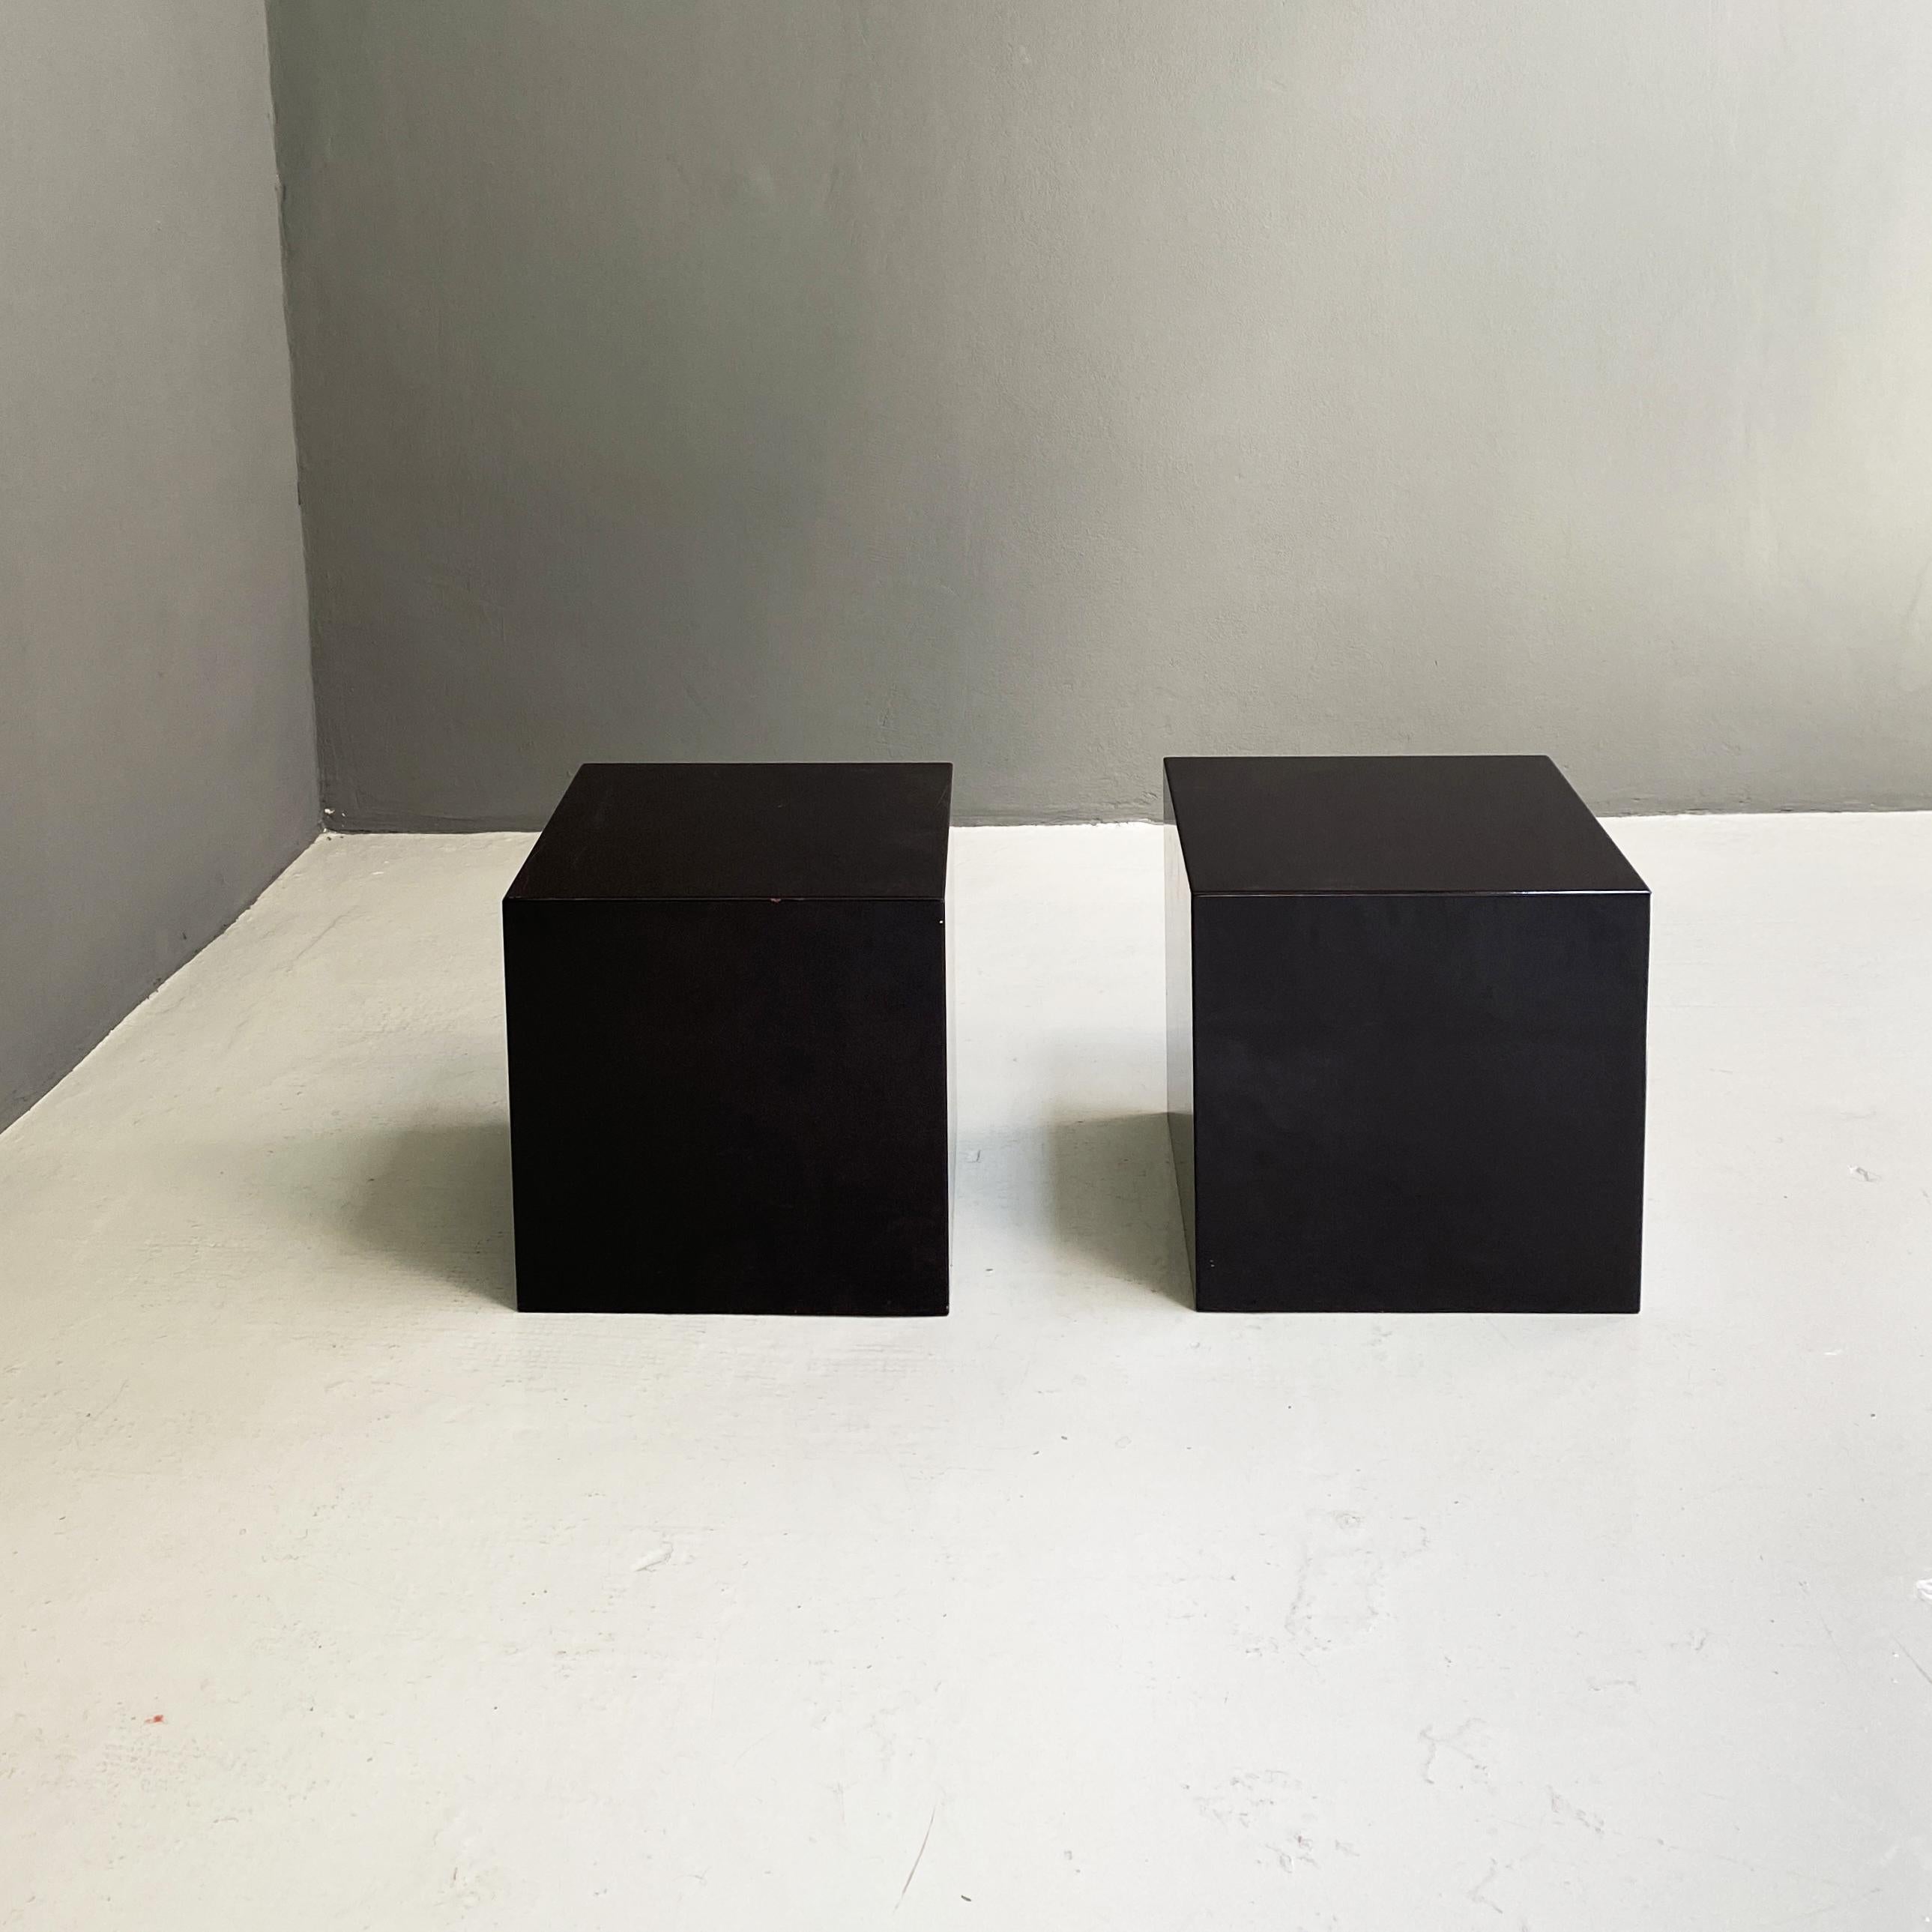 Cube-Shaped Coffee Tables or Bedside Tables in Dark Brown Lacquered Wood, 1990s  For Sale 1